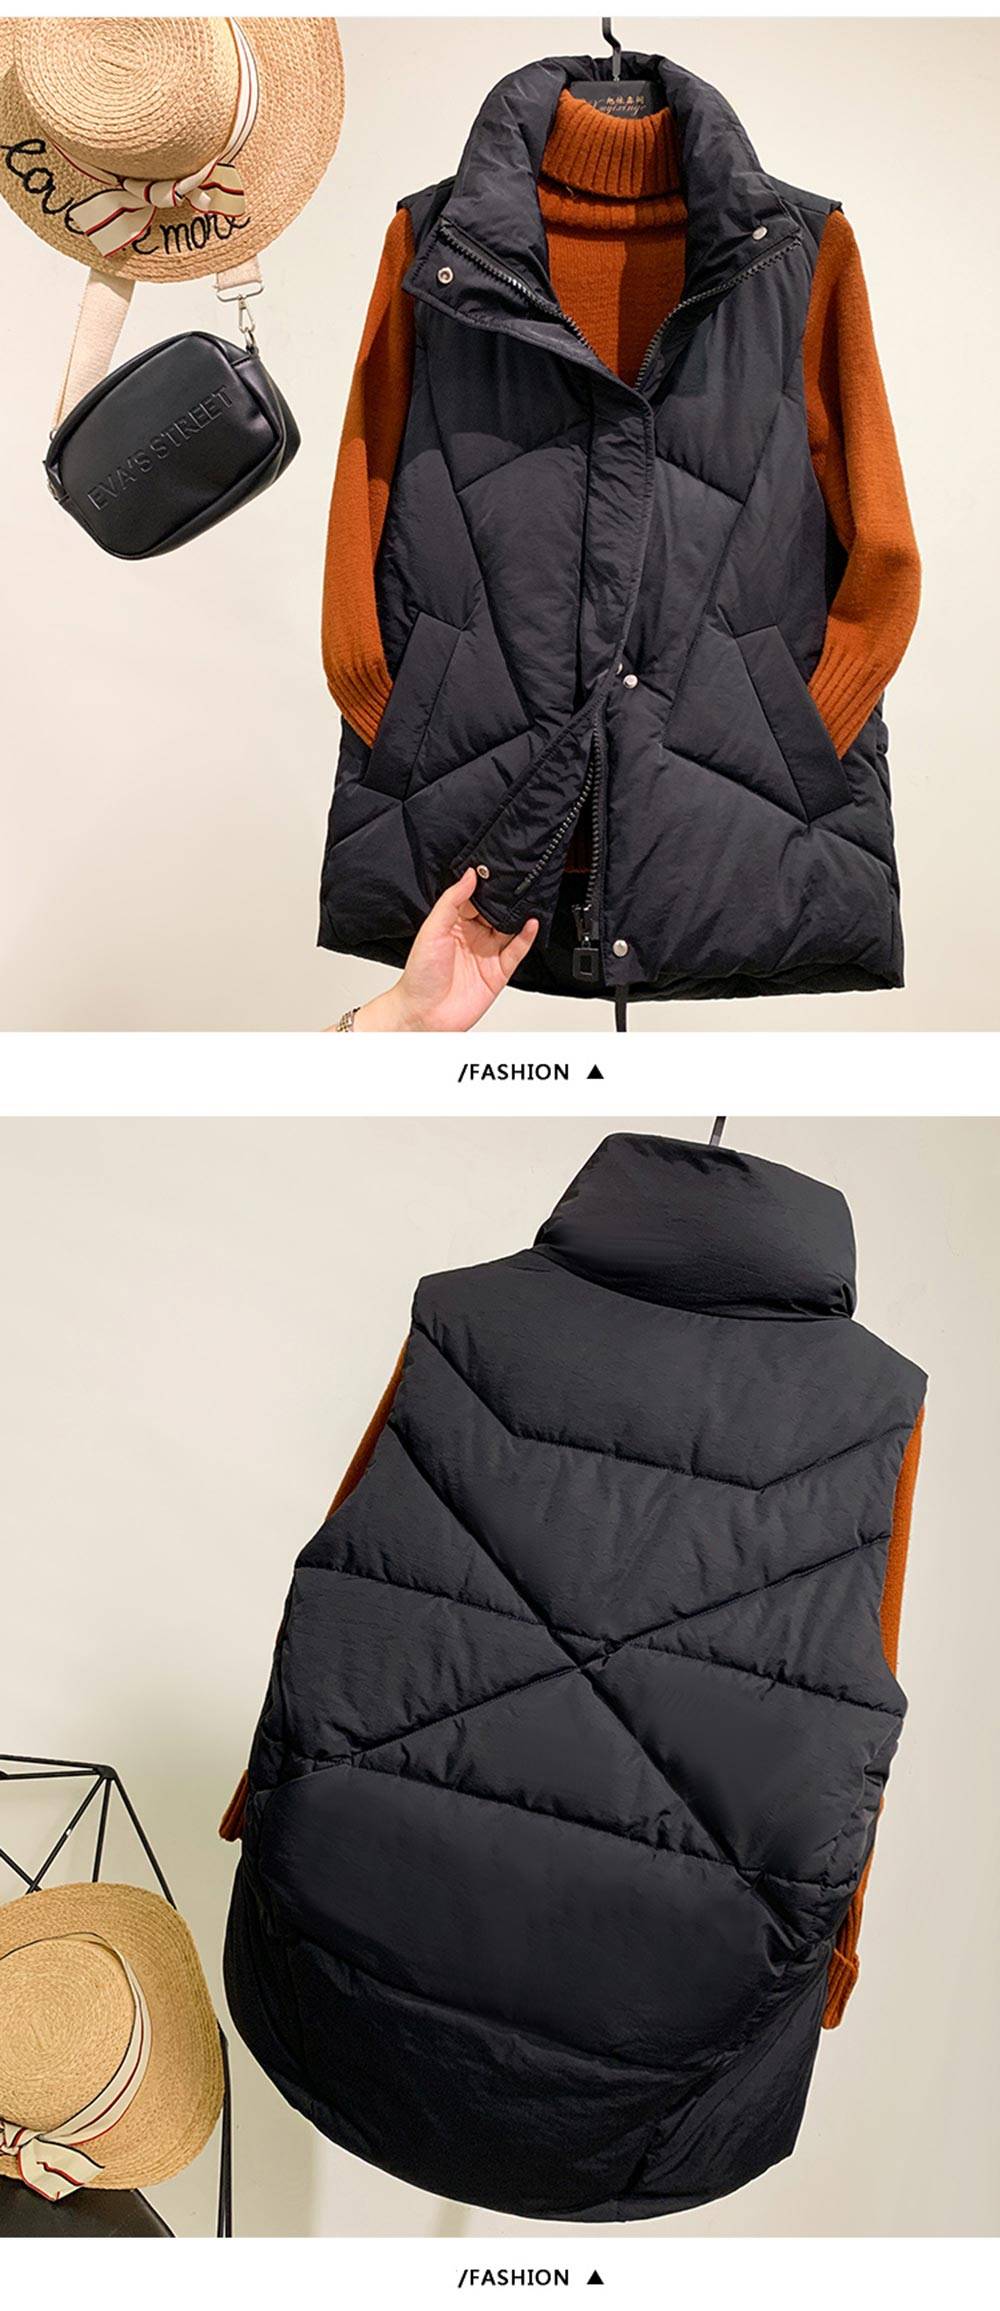 Stand Collar Cotton Padded Sleeveless Jacket Vest in Coats & Jackets